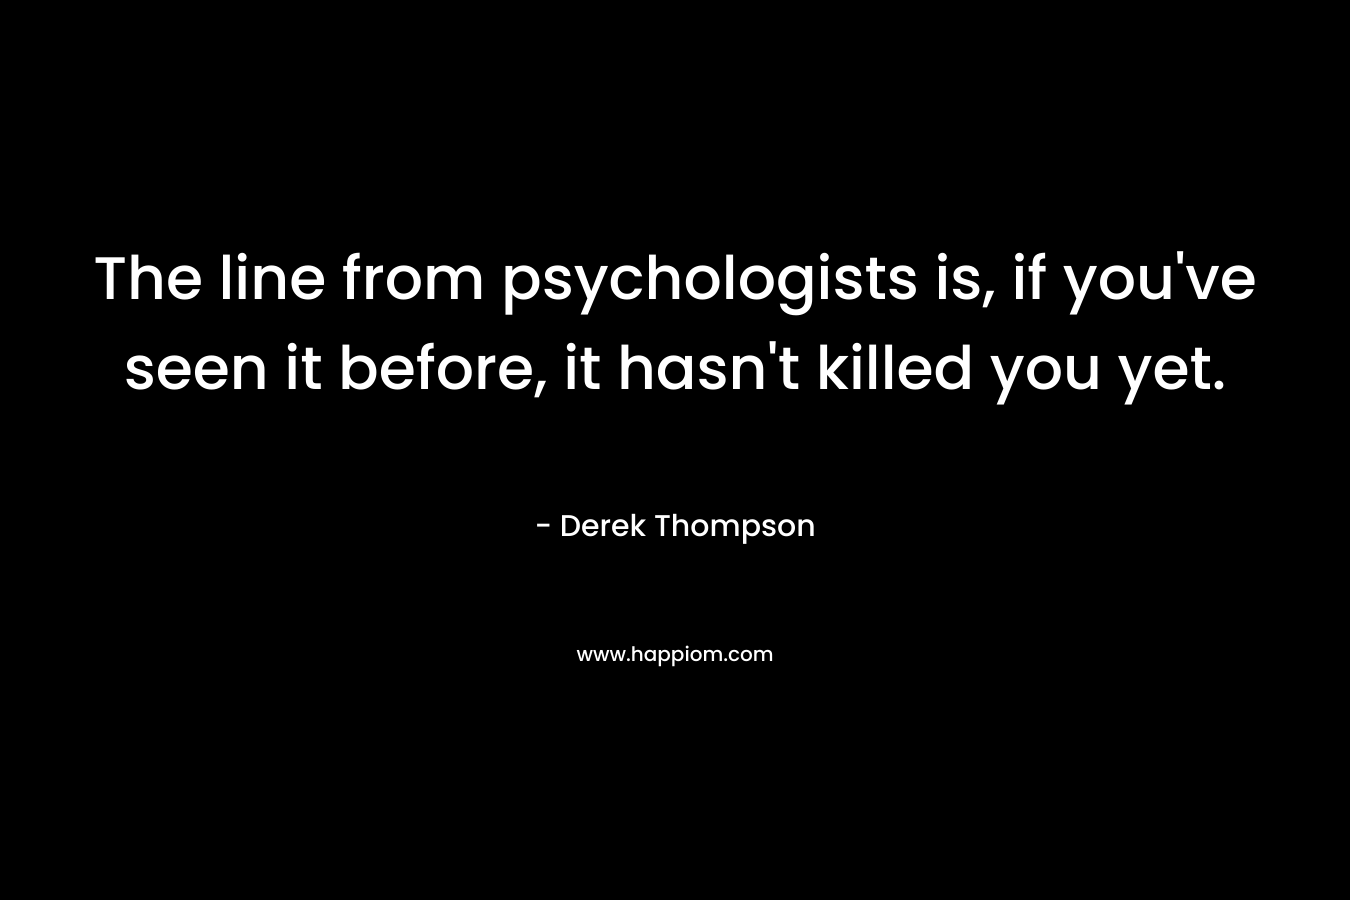 The line from psychologists is, if you’ve seen it before, it hasn’t killed you yet. – Derek Thompson